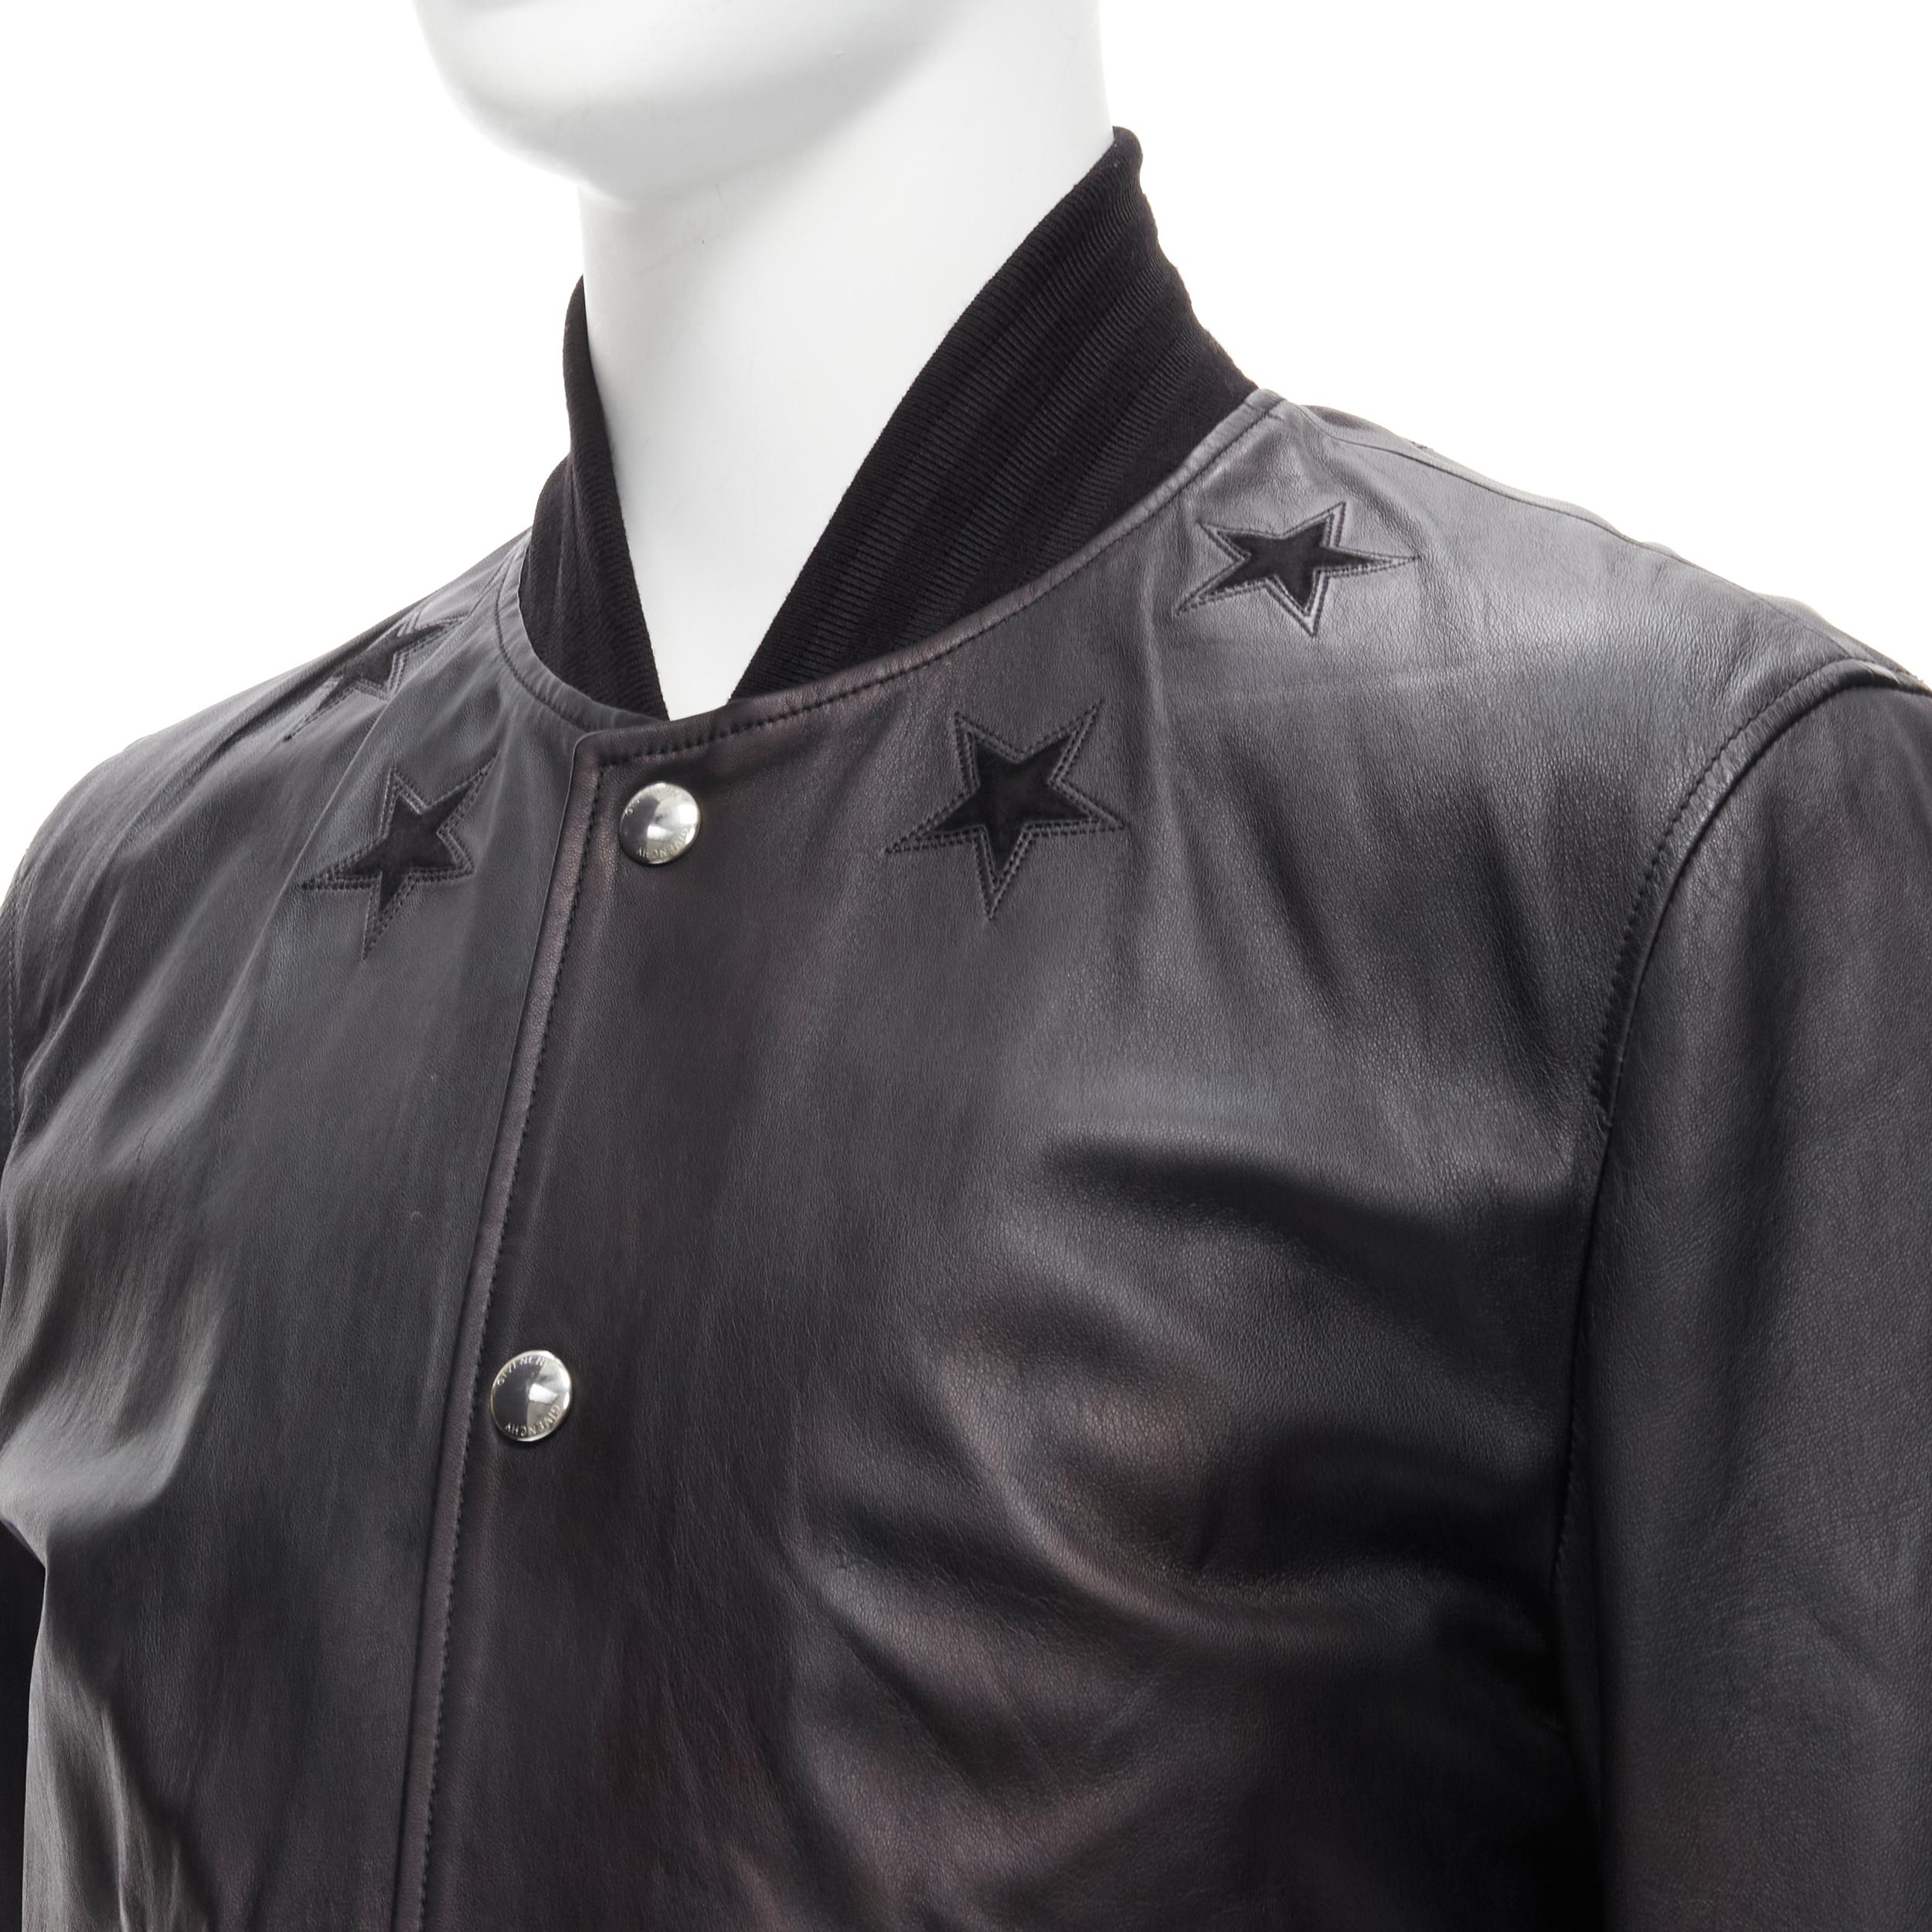 GIVENCHY Riccardo Tisci black signature stars lambskin leather bomber EU48 M
Reference: YNWG/A00087
Brand: Givenchy
Designer: Riccardo Tisci
Material: Lambskin Leather
Color: Black
Pattern: Solid
Closure: Snap Buttons
Lining: Fabric
Extra Details: